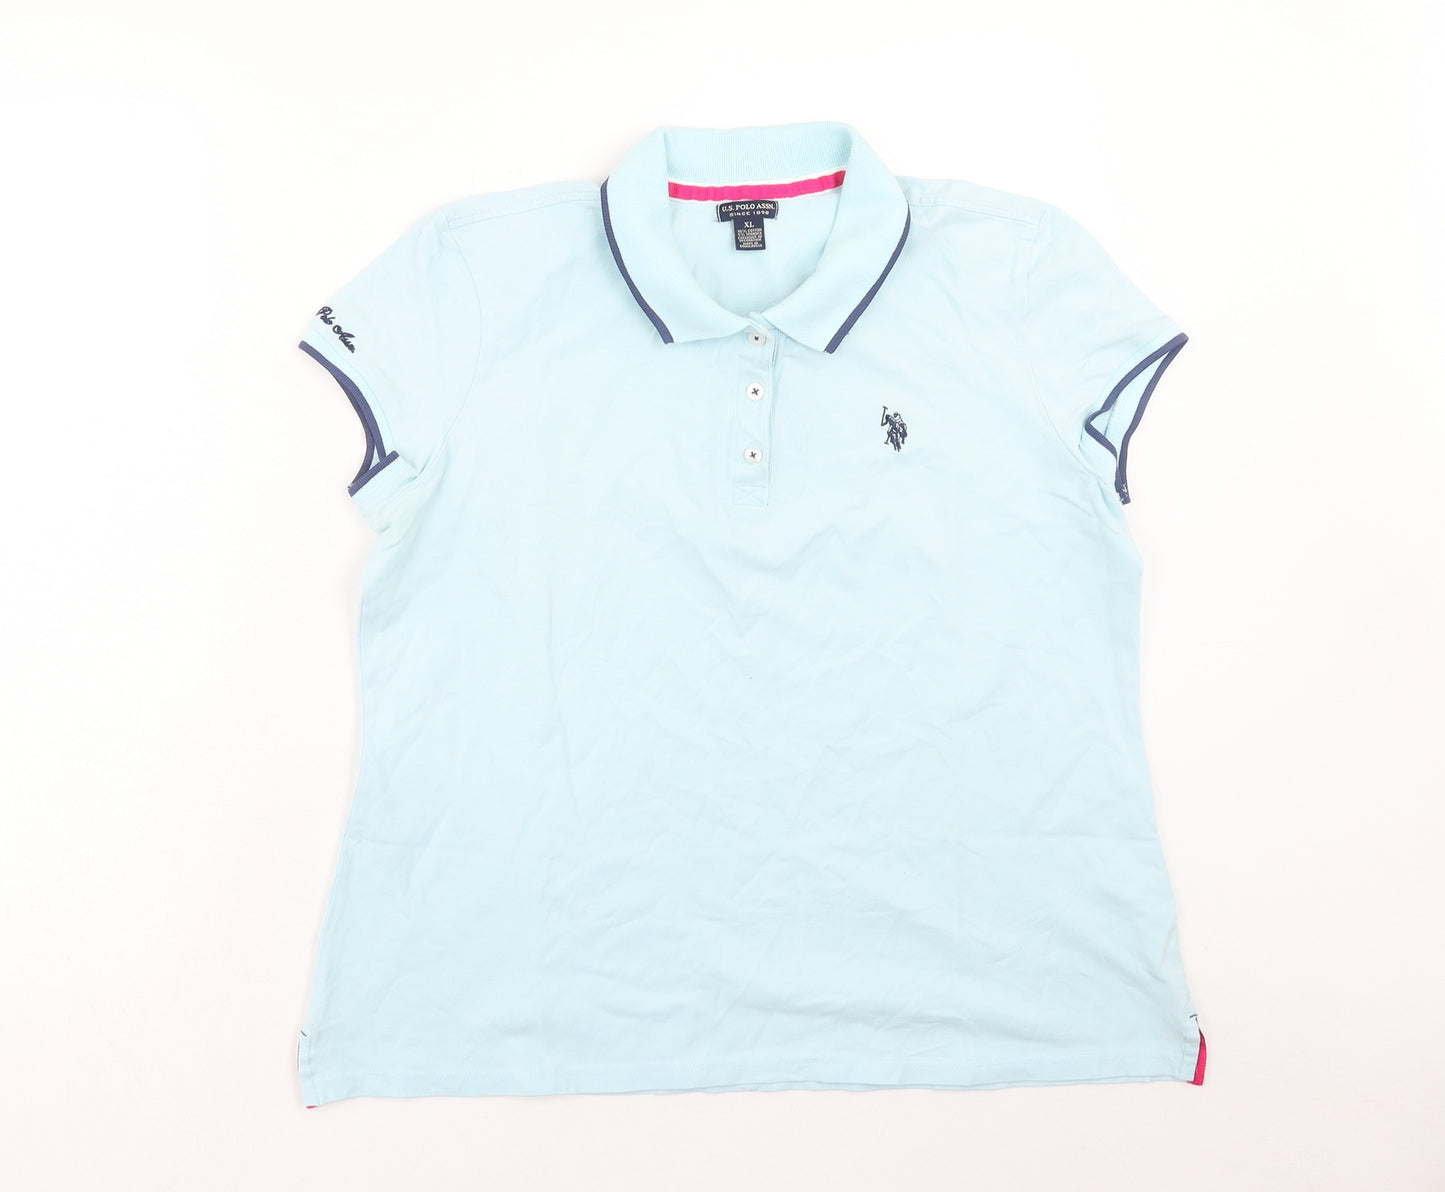 US Polo Assn. Womens Blue Cotton Basic Polo Size L Collared